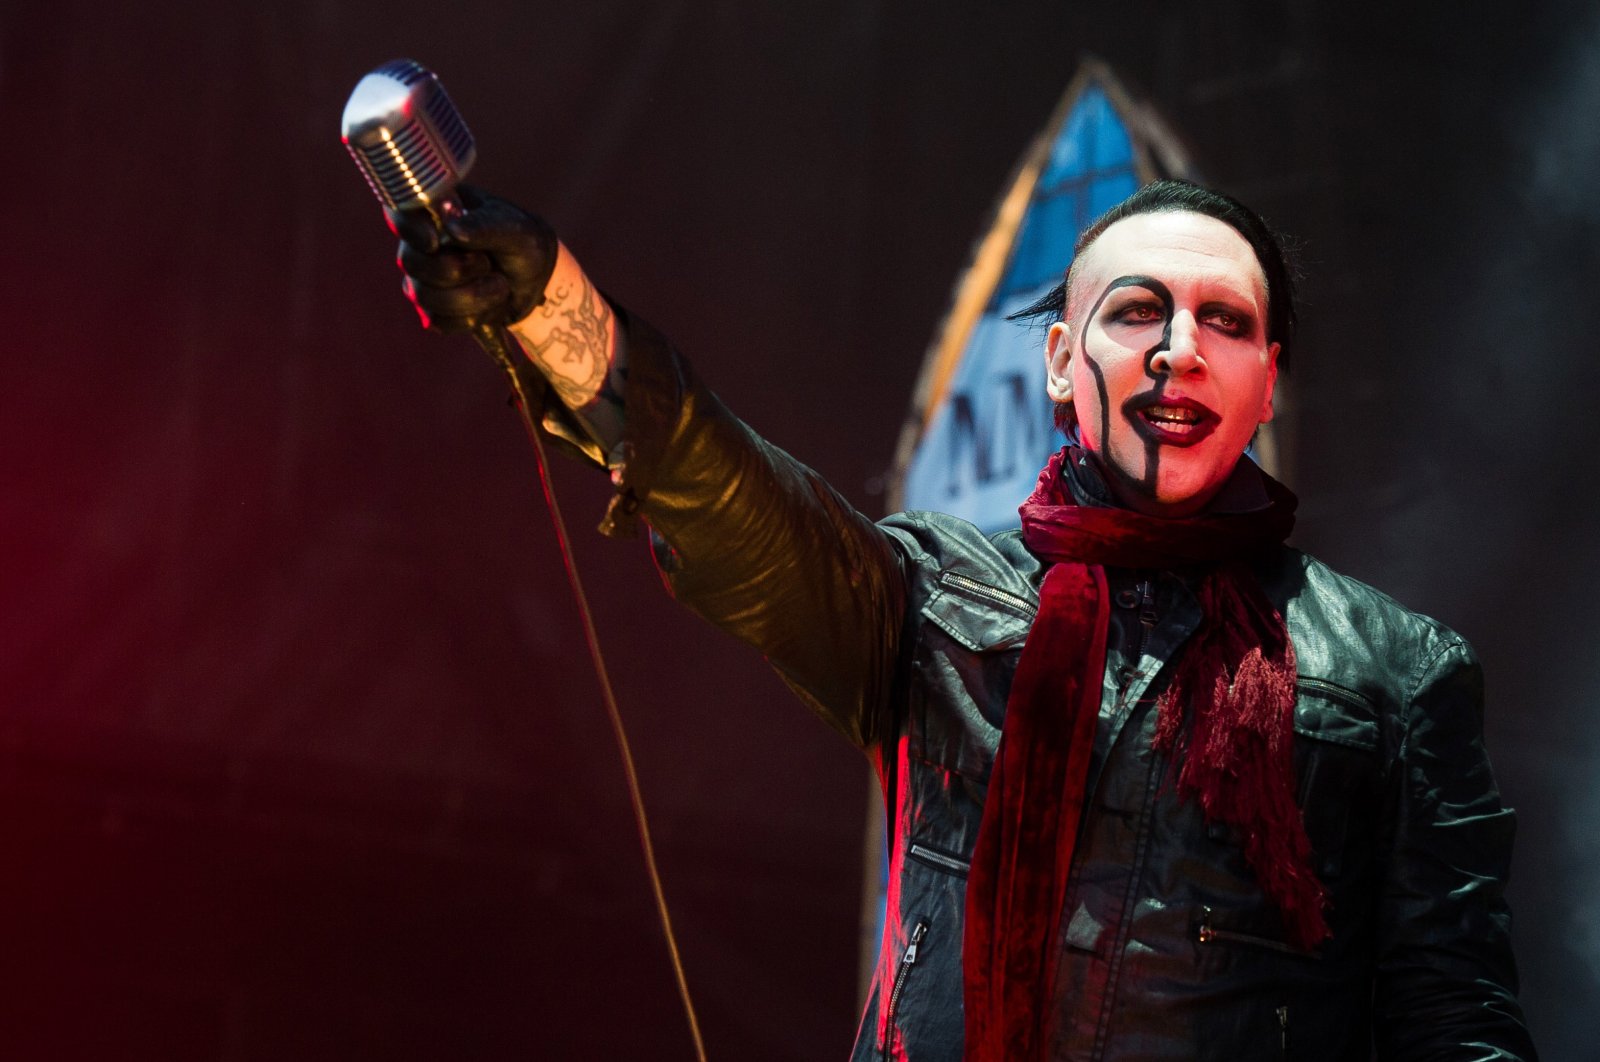 Marilyn Manson performs at the Nikon at Jones Beach Theater on Friday, July 31, 2015 in Wantagh, N.Y. (AP)